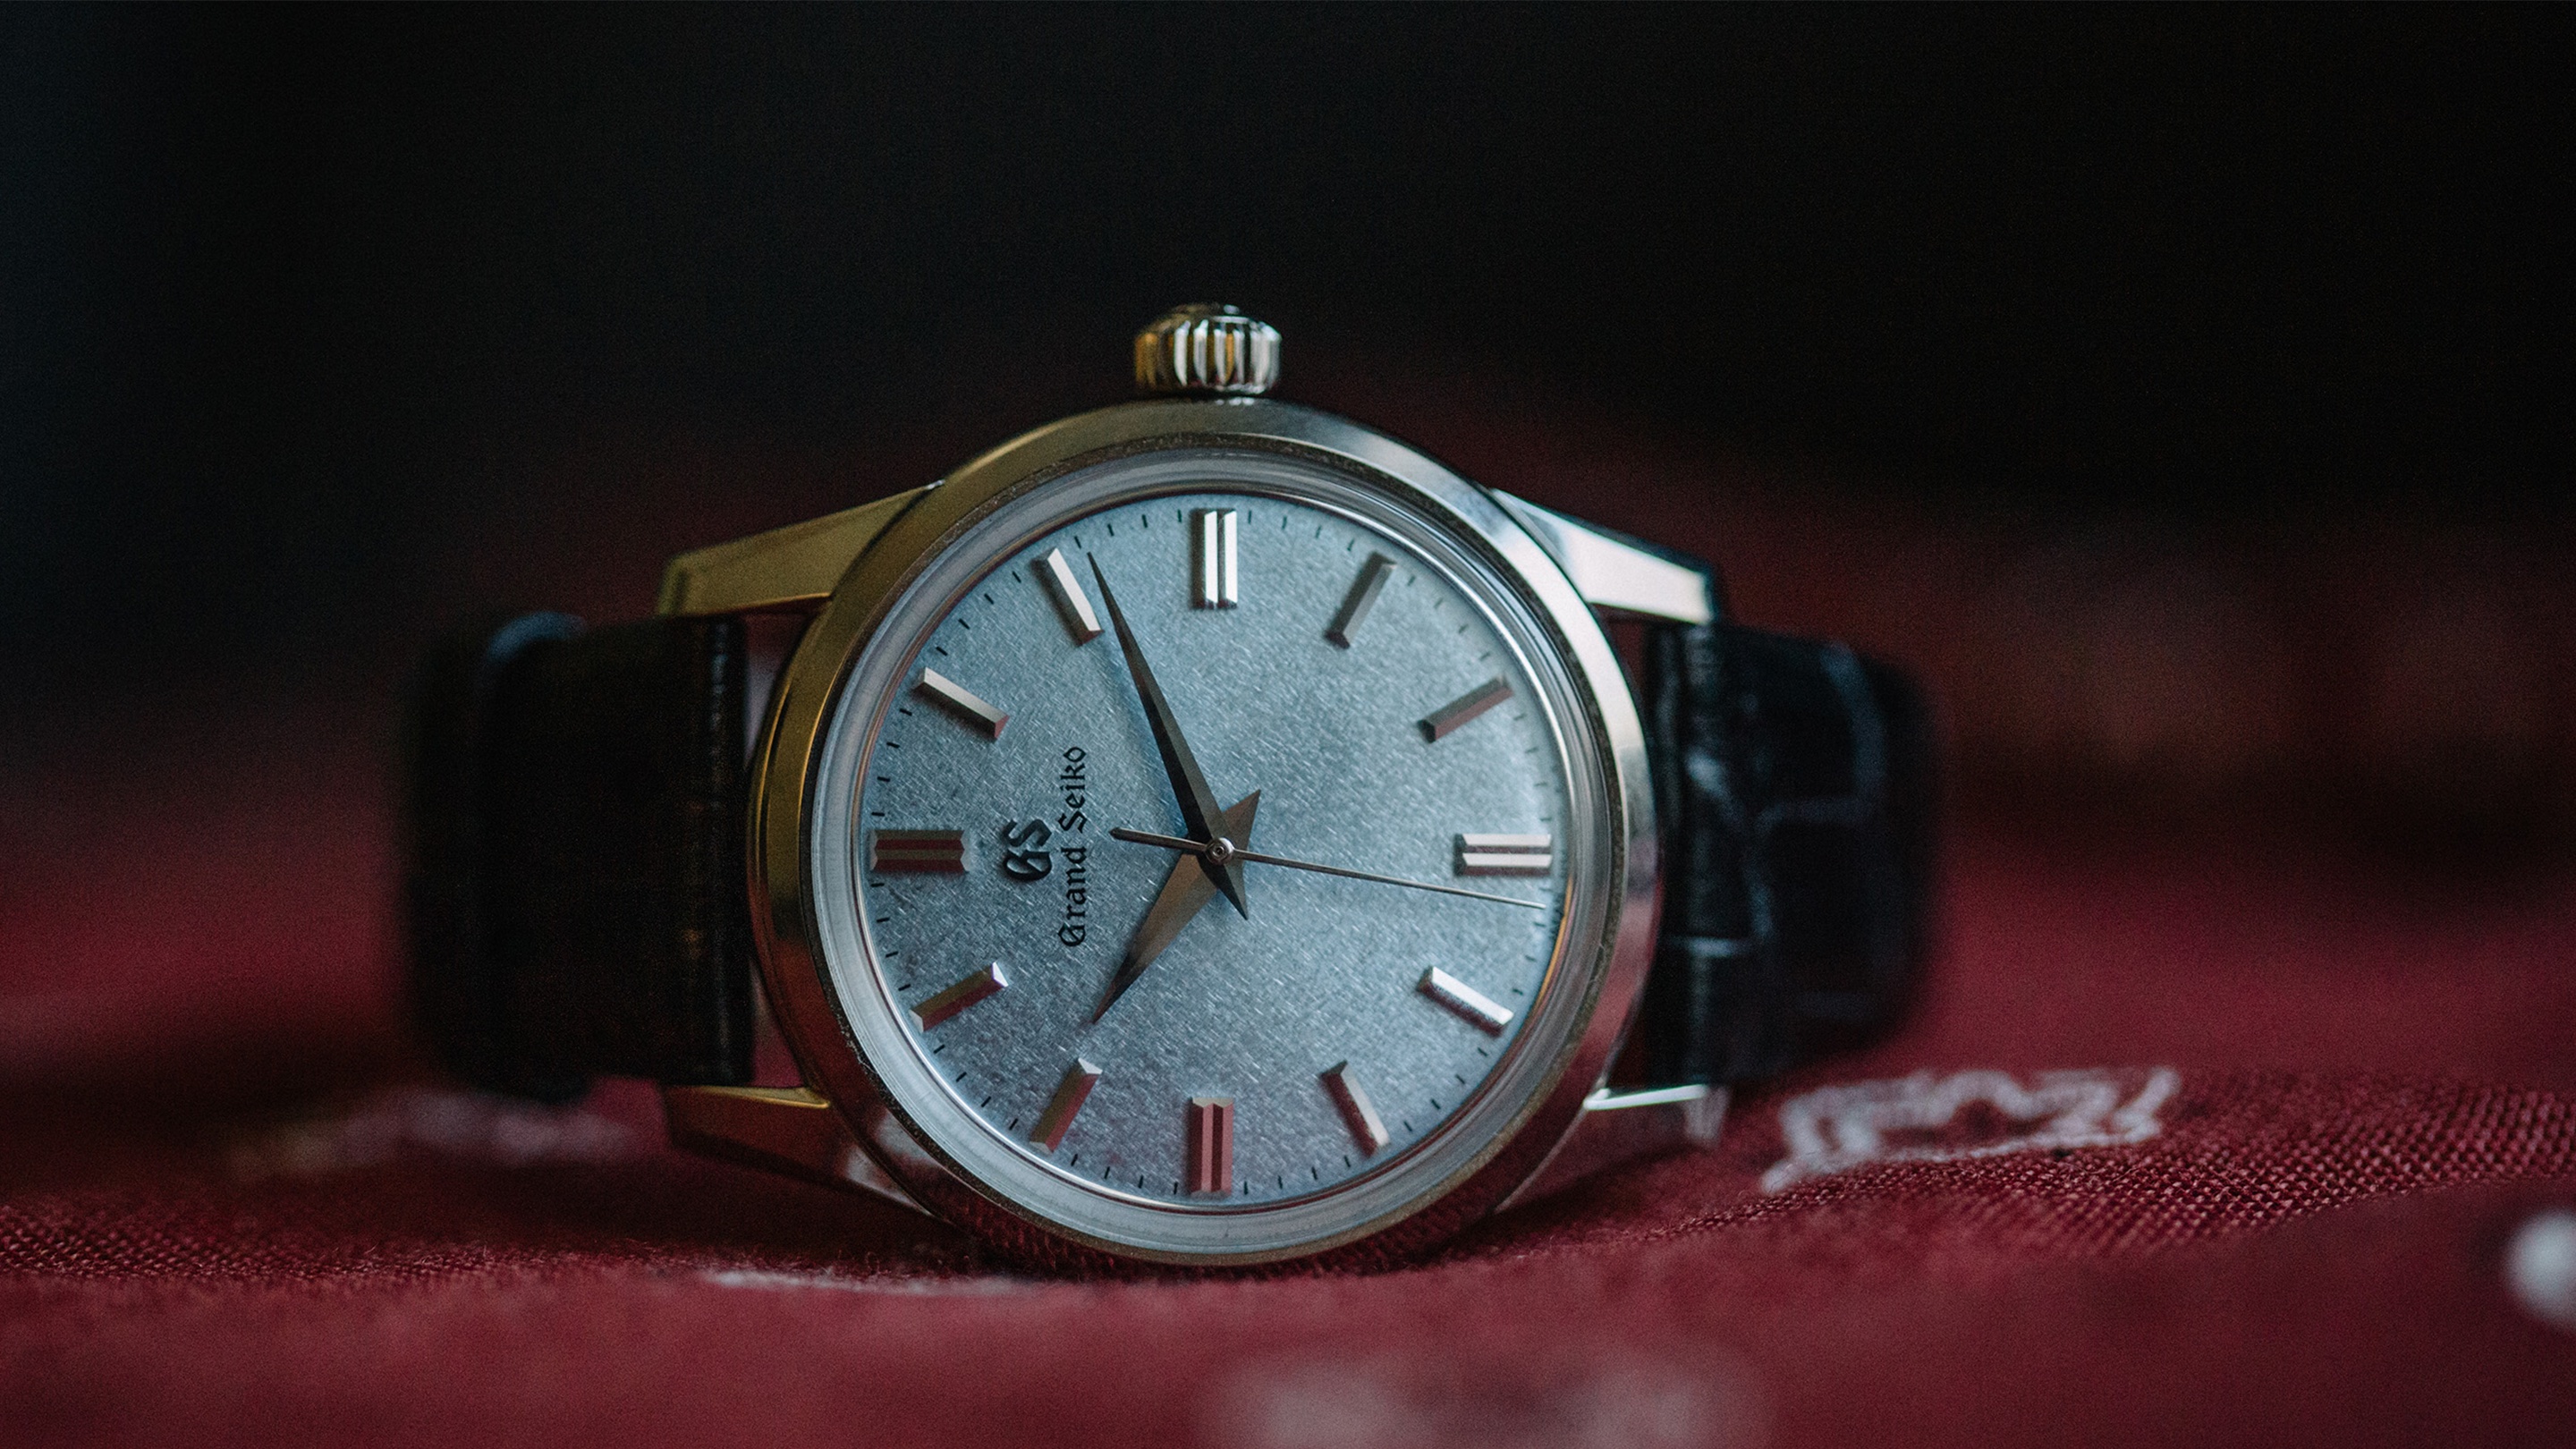 The Beginner's Guide To Mechanical Watches | FashionBeans